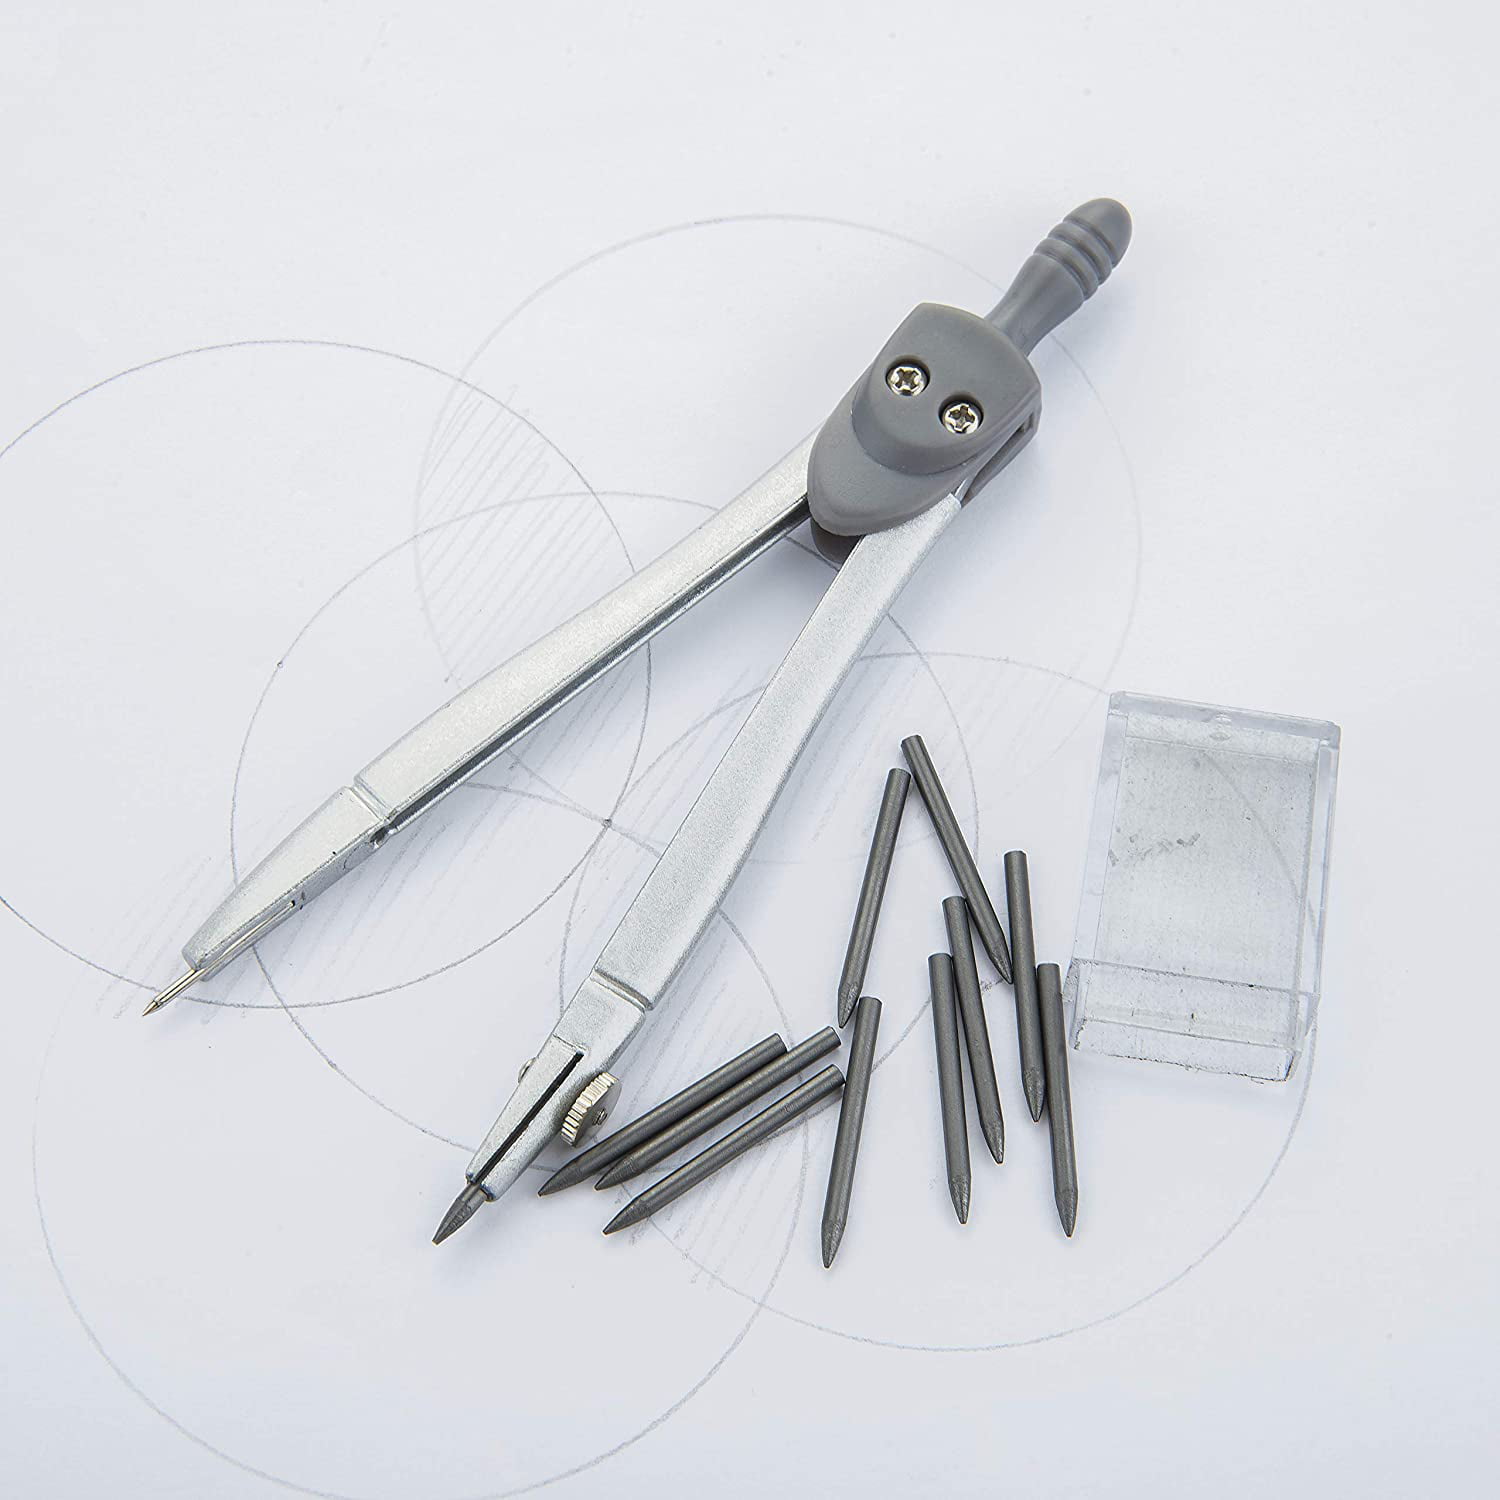 2B 2mm refills/leads for compasses and mechanical automatic pencils sketching C9 